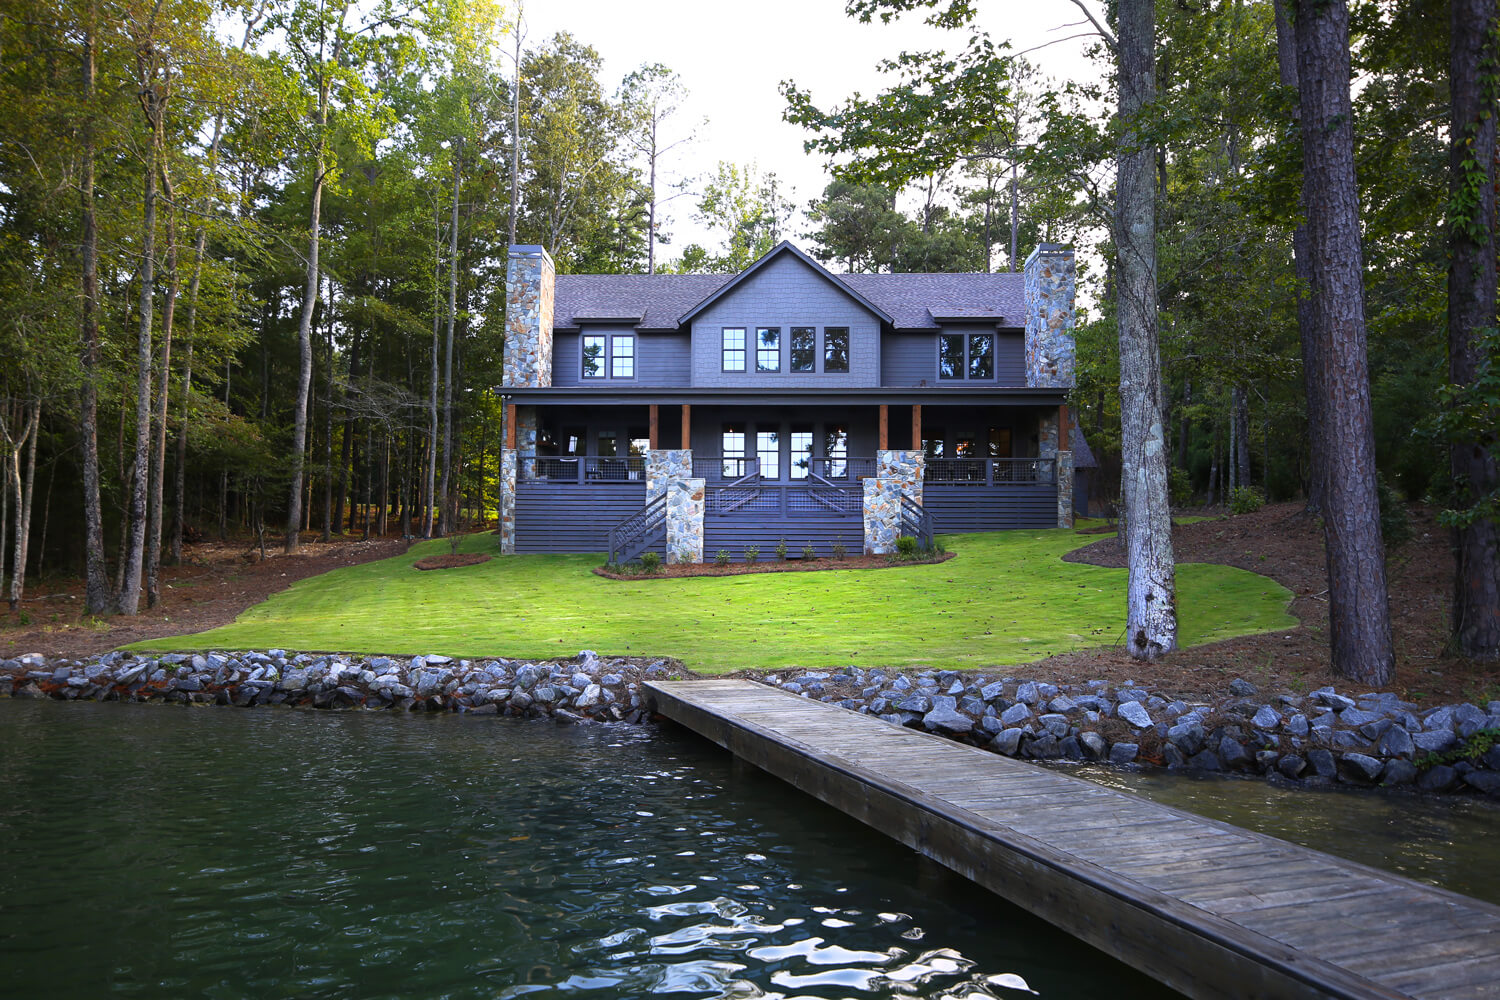 Lake Martin Cabin - View from Pier - Designed by Foshee Architecture